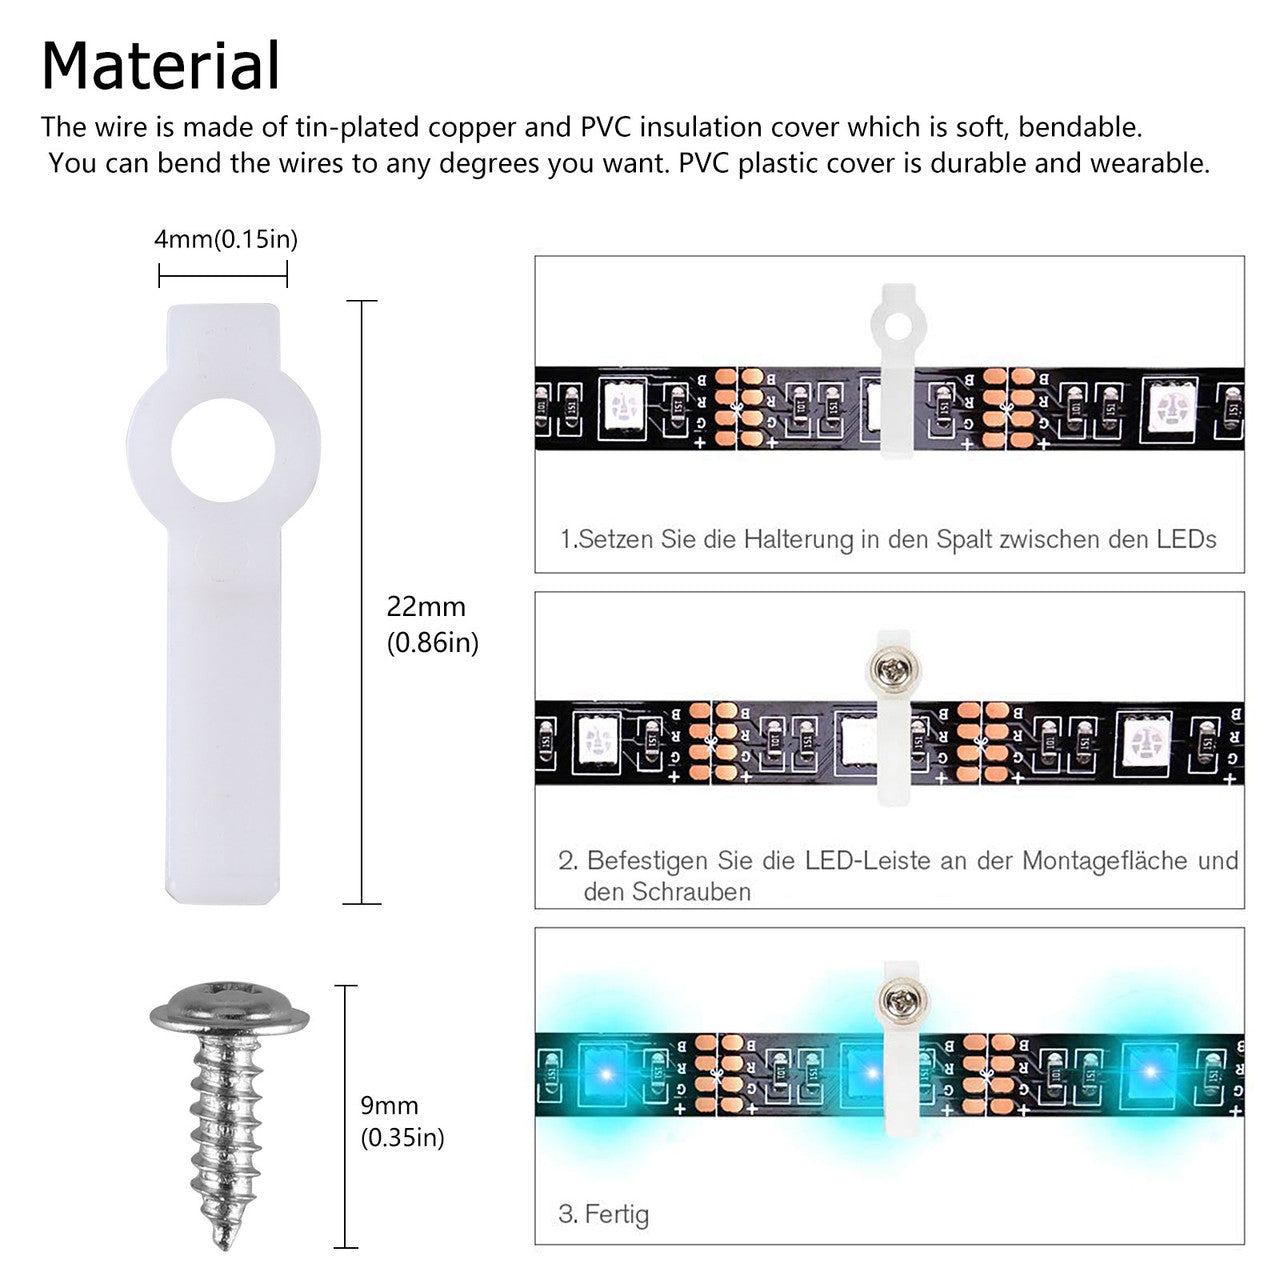 5050 4 Pin LED Strip Connector Kit - 8 Types of Solderless LED Strip Accessories Include LED Strip Light Connector Pigtails, Jumper Connectors, L Shape Connectors, Gapless Connectors, LED Strip Clips